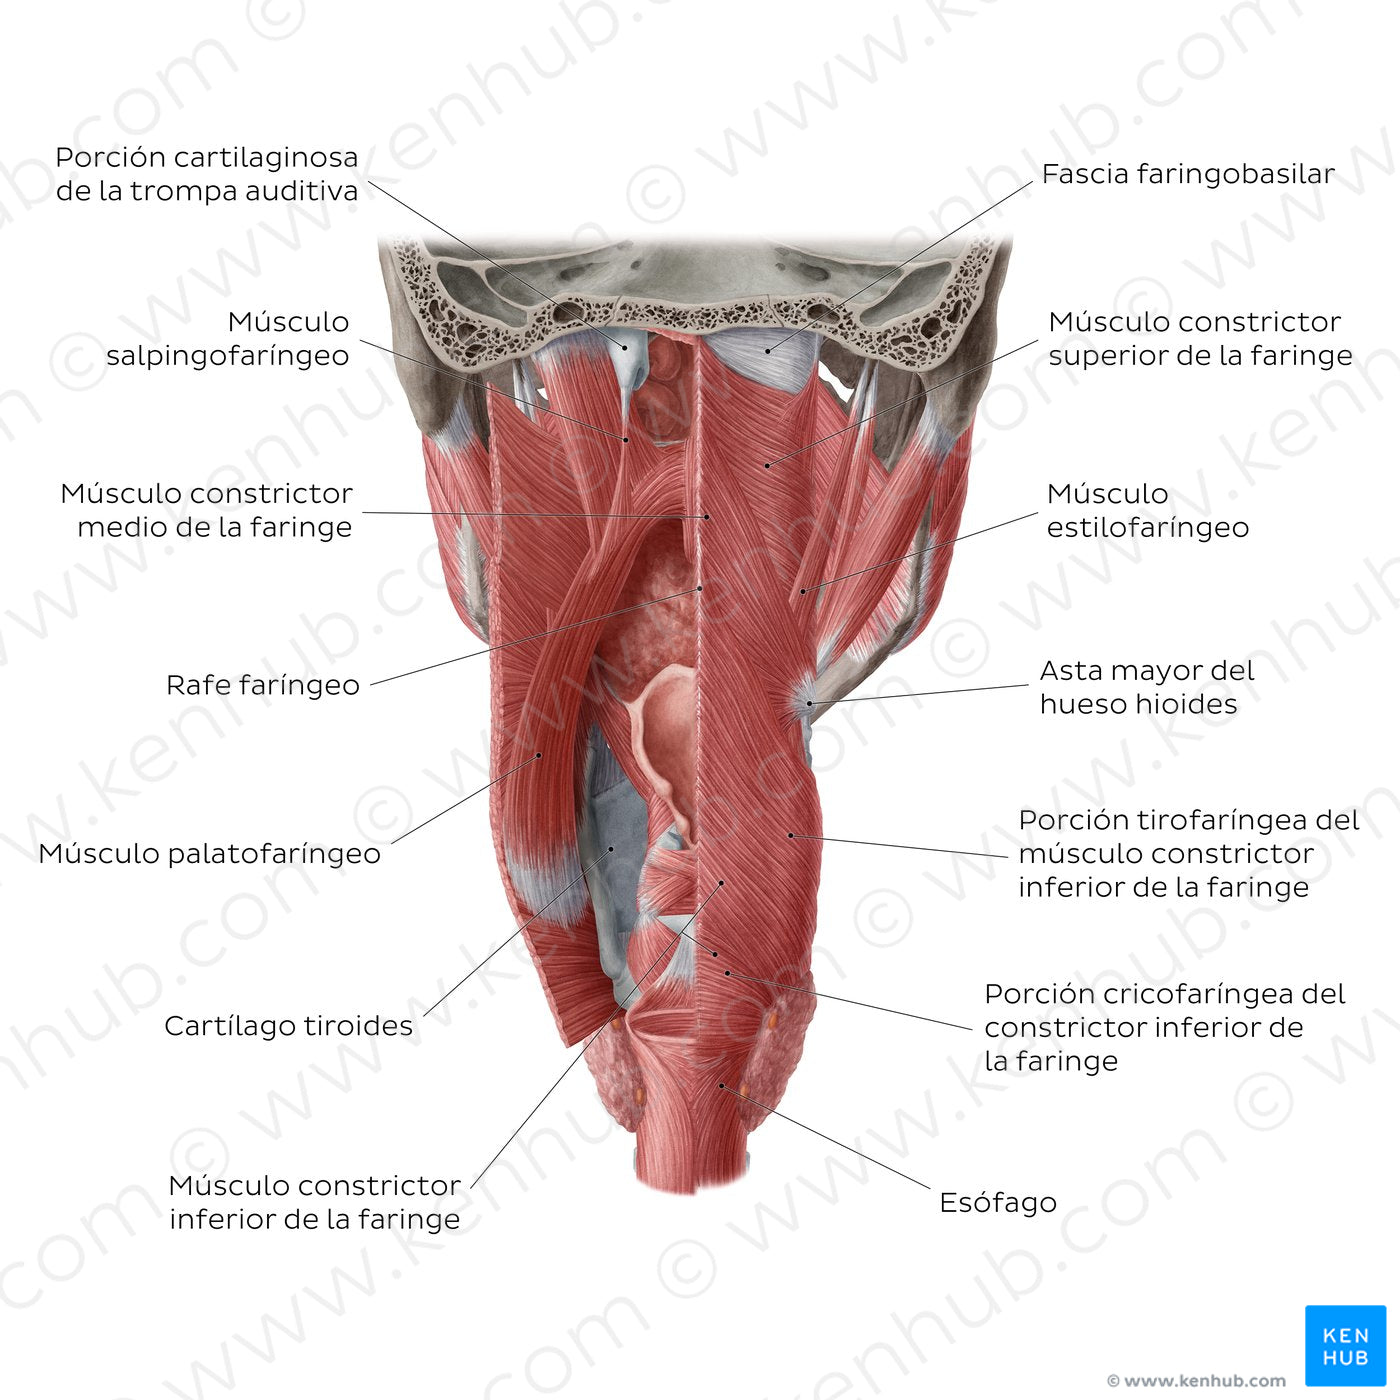 Muscles of the pharynx (Spanish)